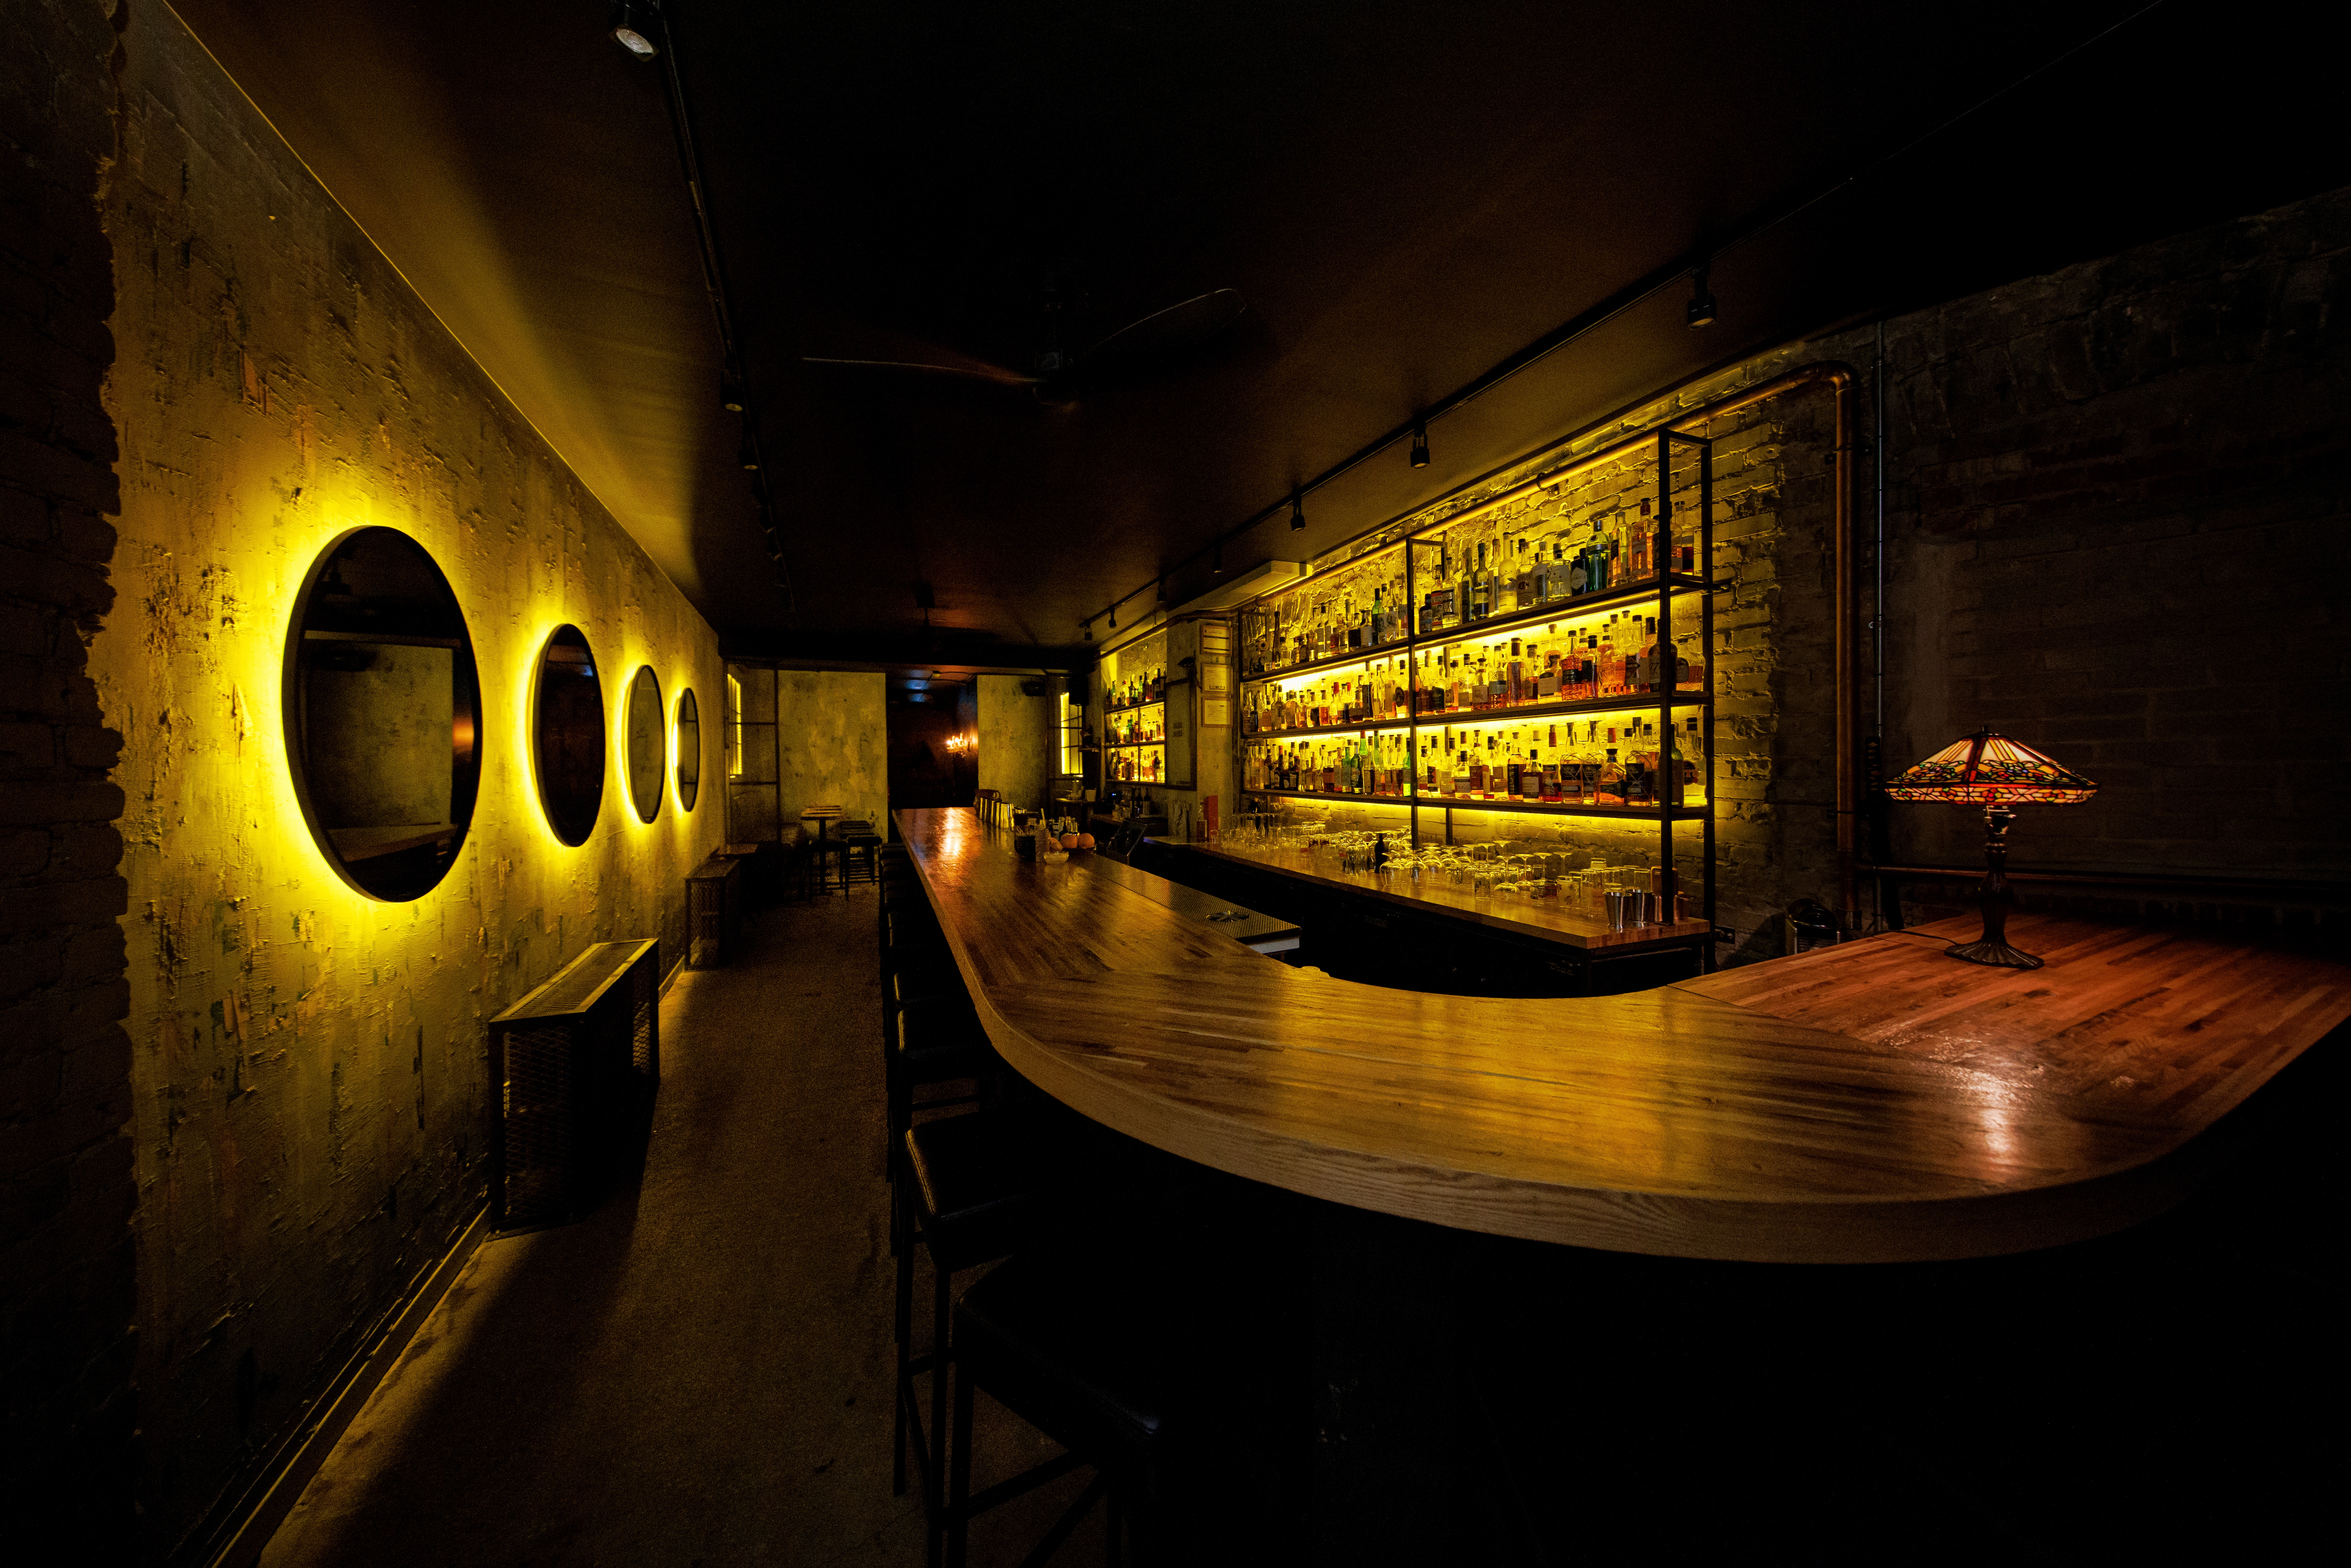 Hidden behind a functioning art gallery, Cry Baby Gallery is a speakeasy-style bar with an industrial vibe.